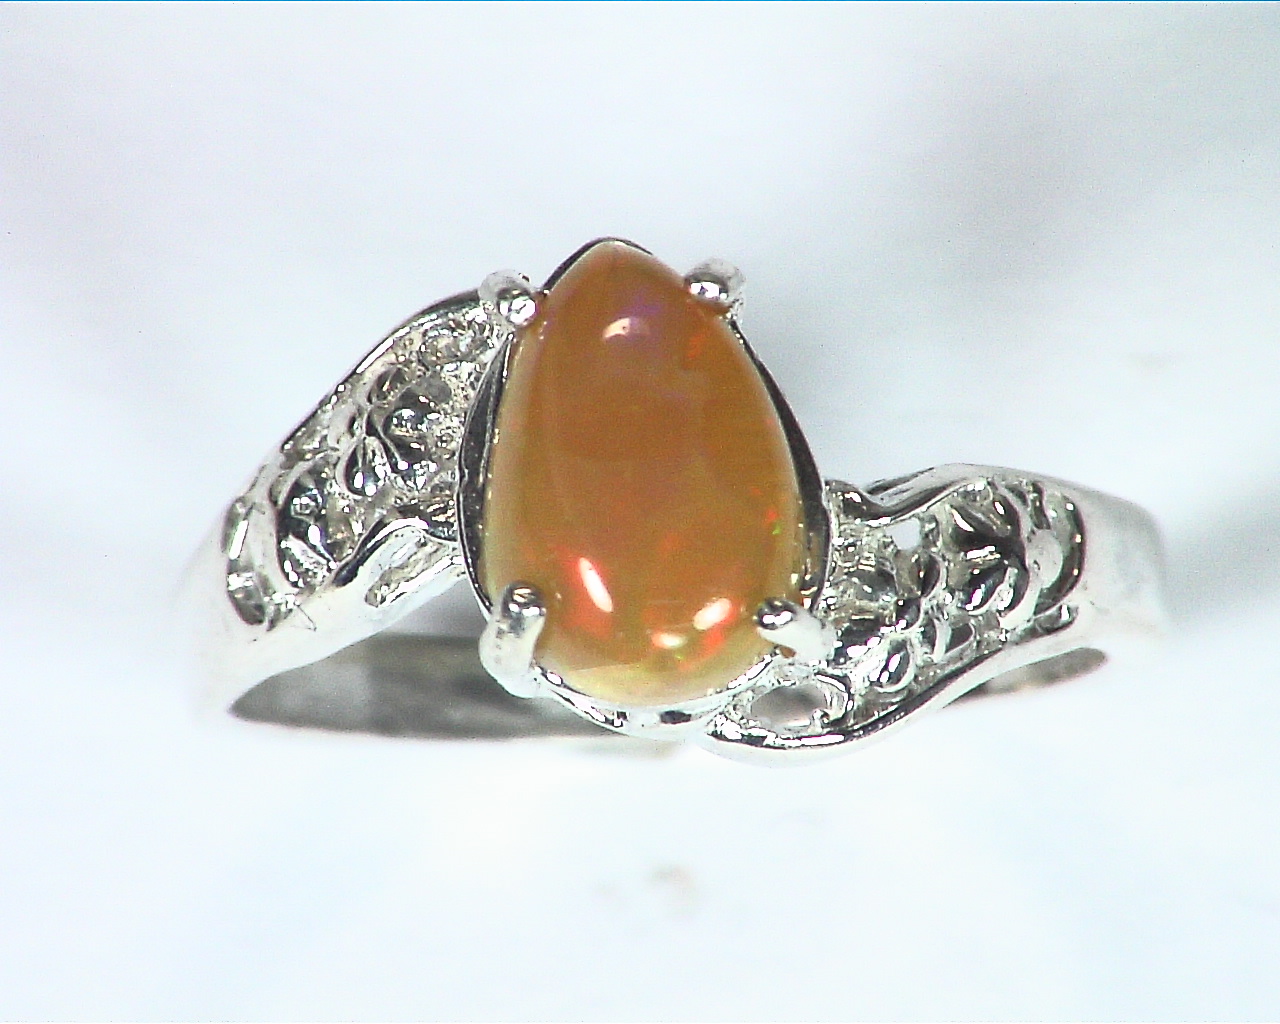 Opal (Mexican) Genuine Gemstone in Sterling silver Ring RSS,600